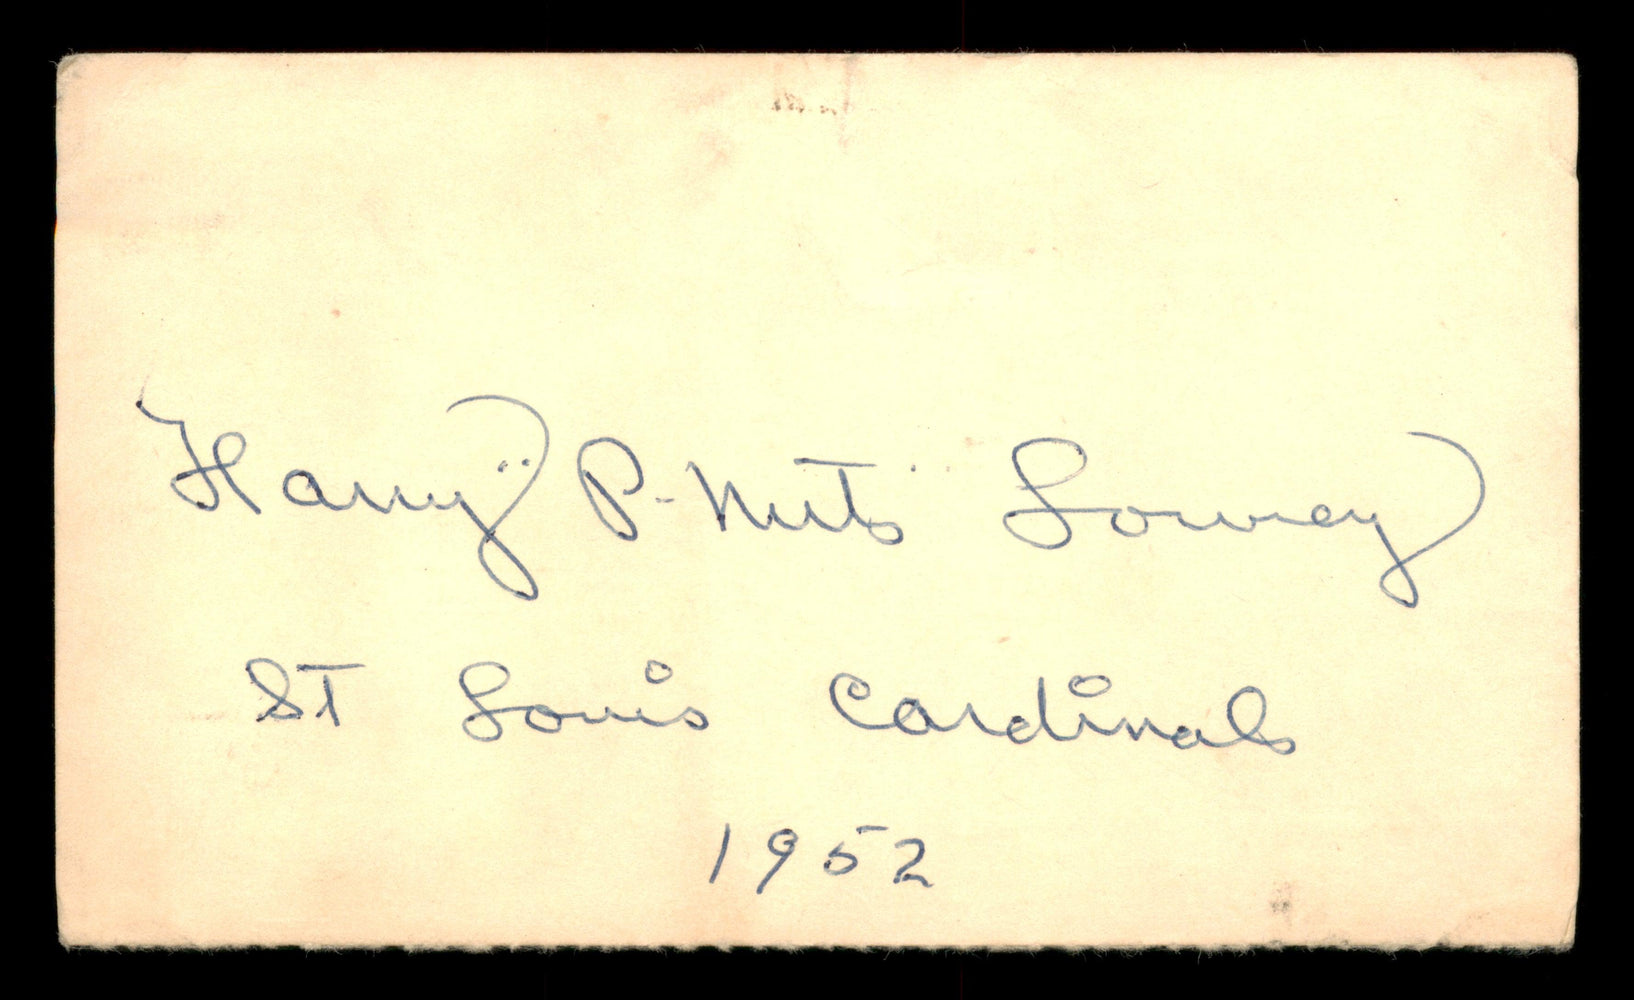 Harry "P-Nuts" Lowrey Autographed 3.25x5.5 Government Postcard St. Louis Cardinals "1952" SKU #201450 - RSA